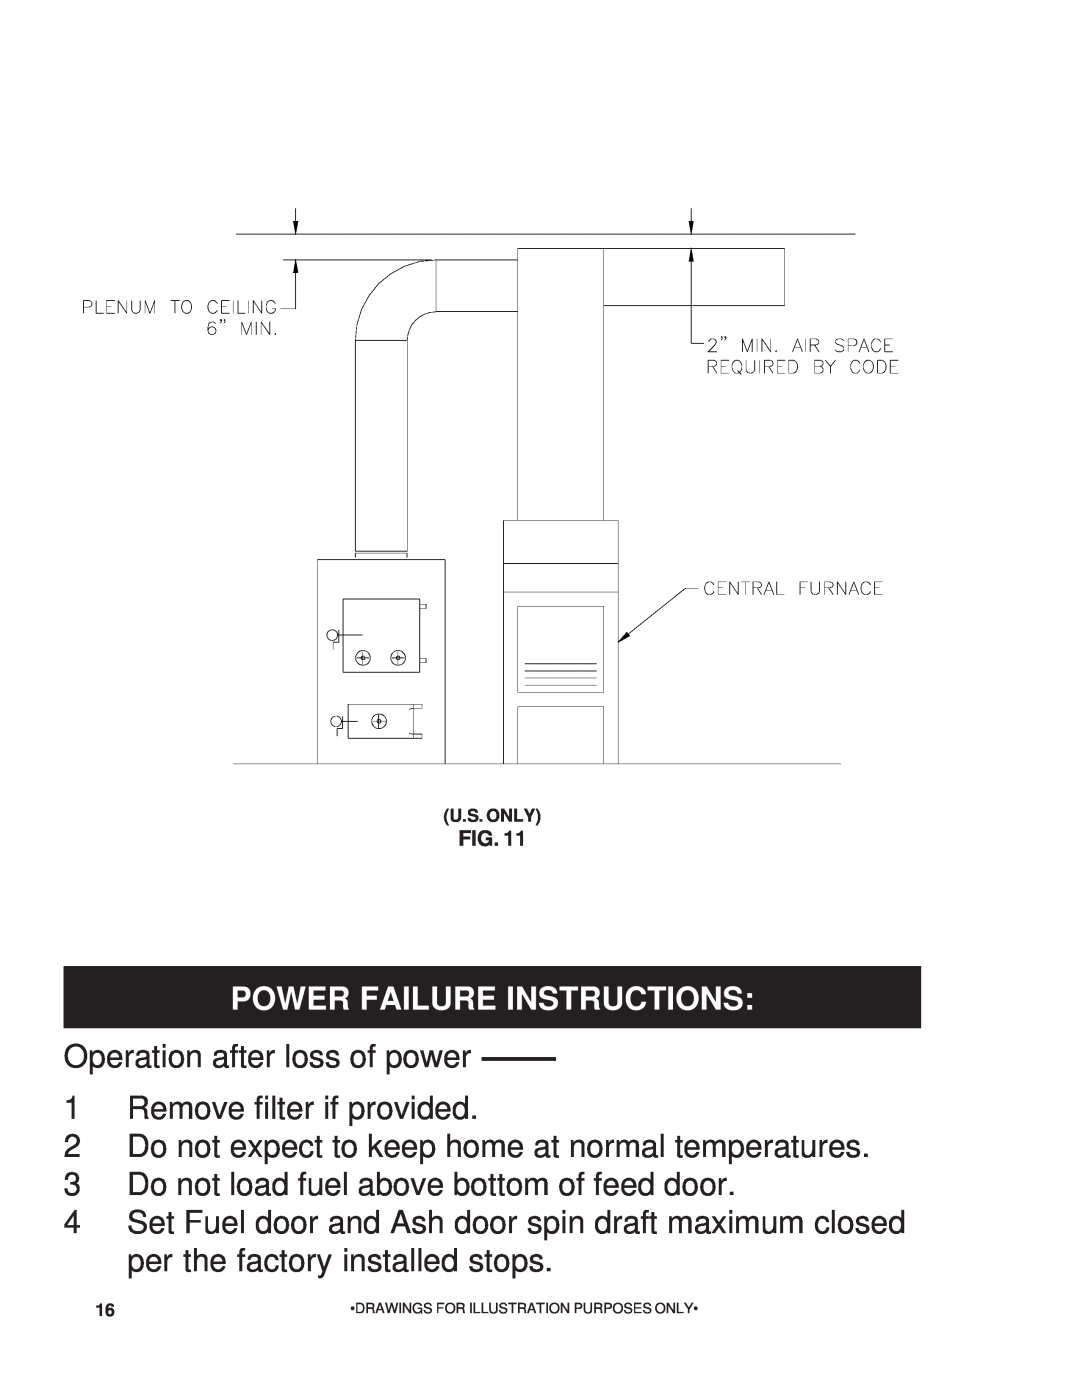 United States Stove 22AF Power Failure Instructions, Operation after loss of power, 1Remove filter if provided, U.S. Only 